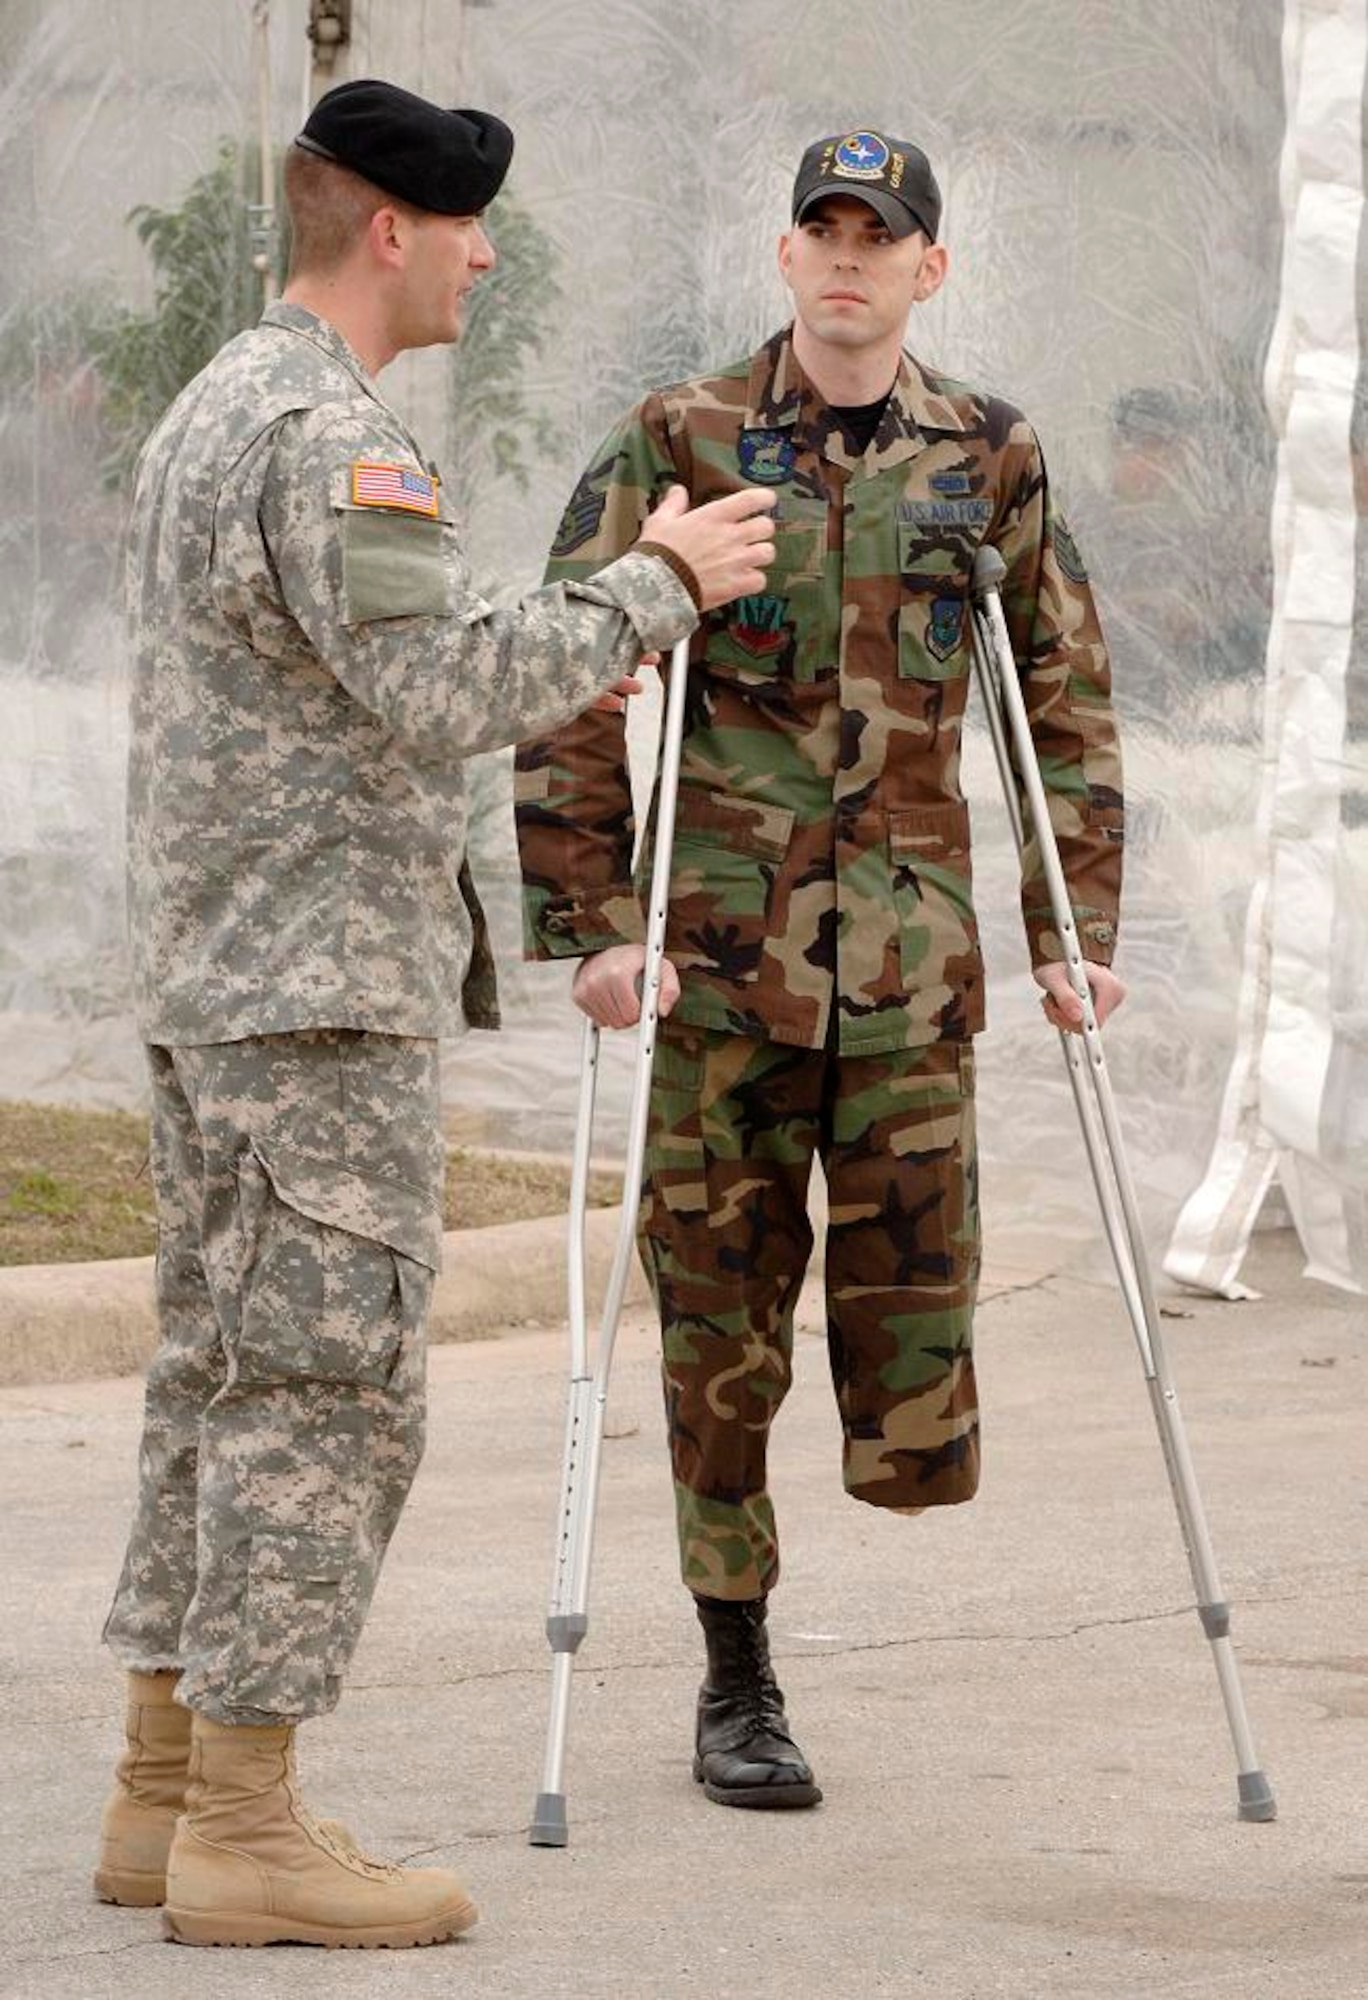 Staff Sgt. Justin Beil is escorted by Army Capt. Brian Freideline from Brooke Army Medical Center before the ceremony to open the Center for the Intrepid, a rehabilitation center for amputees and burn victims.  Sergeant Beil is assigned to the 59th Medical Wing at Lackland Air Force Base, Texas, and will use the new facility on an out-patient basis. (U.S. Air Force photo/Daren Reehl)